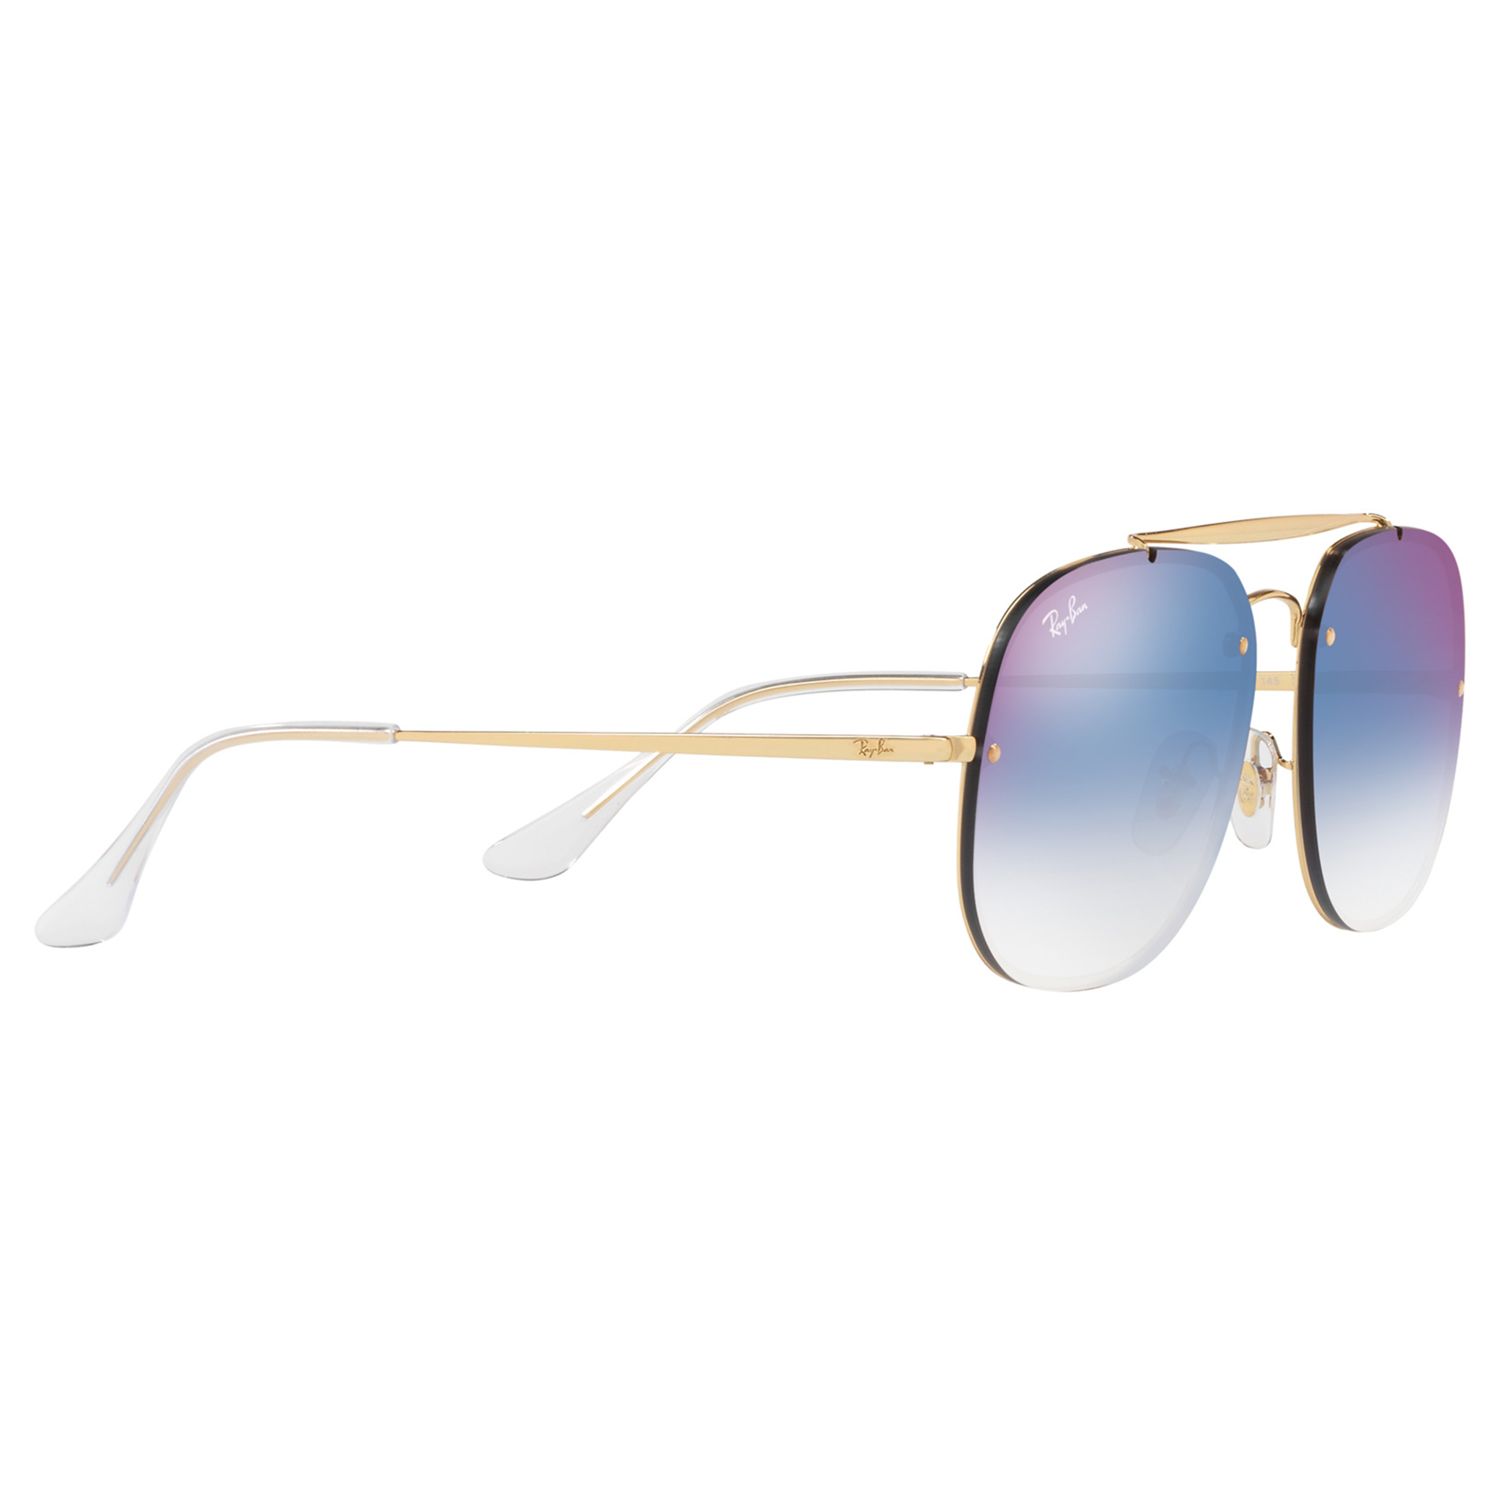 Ray-Ban RB3583 Unisex Square Sunglasses, Gold/Blue